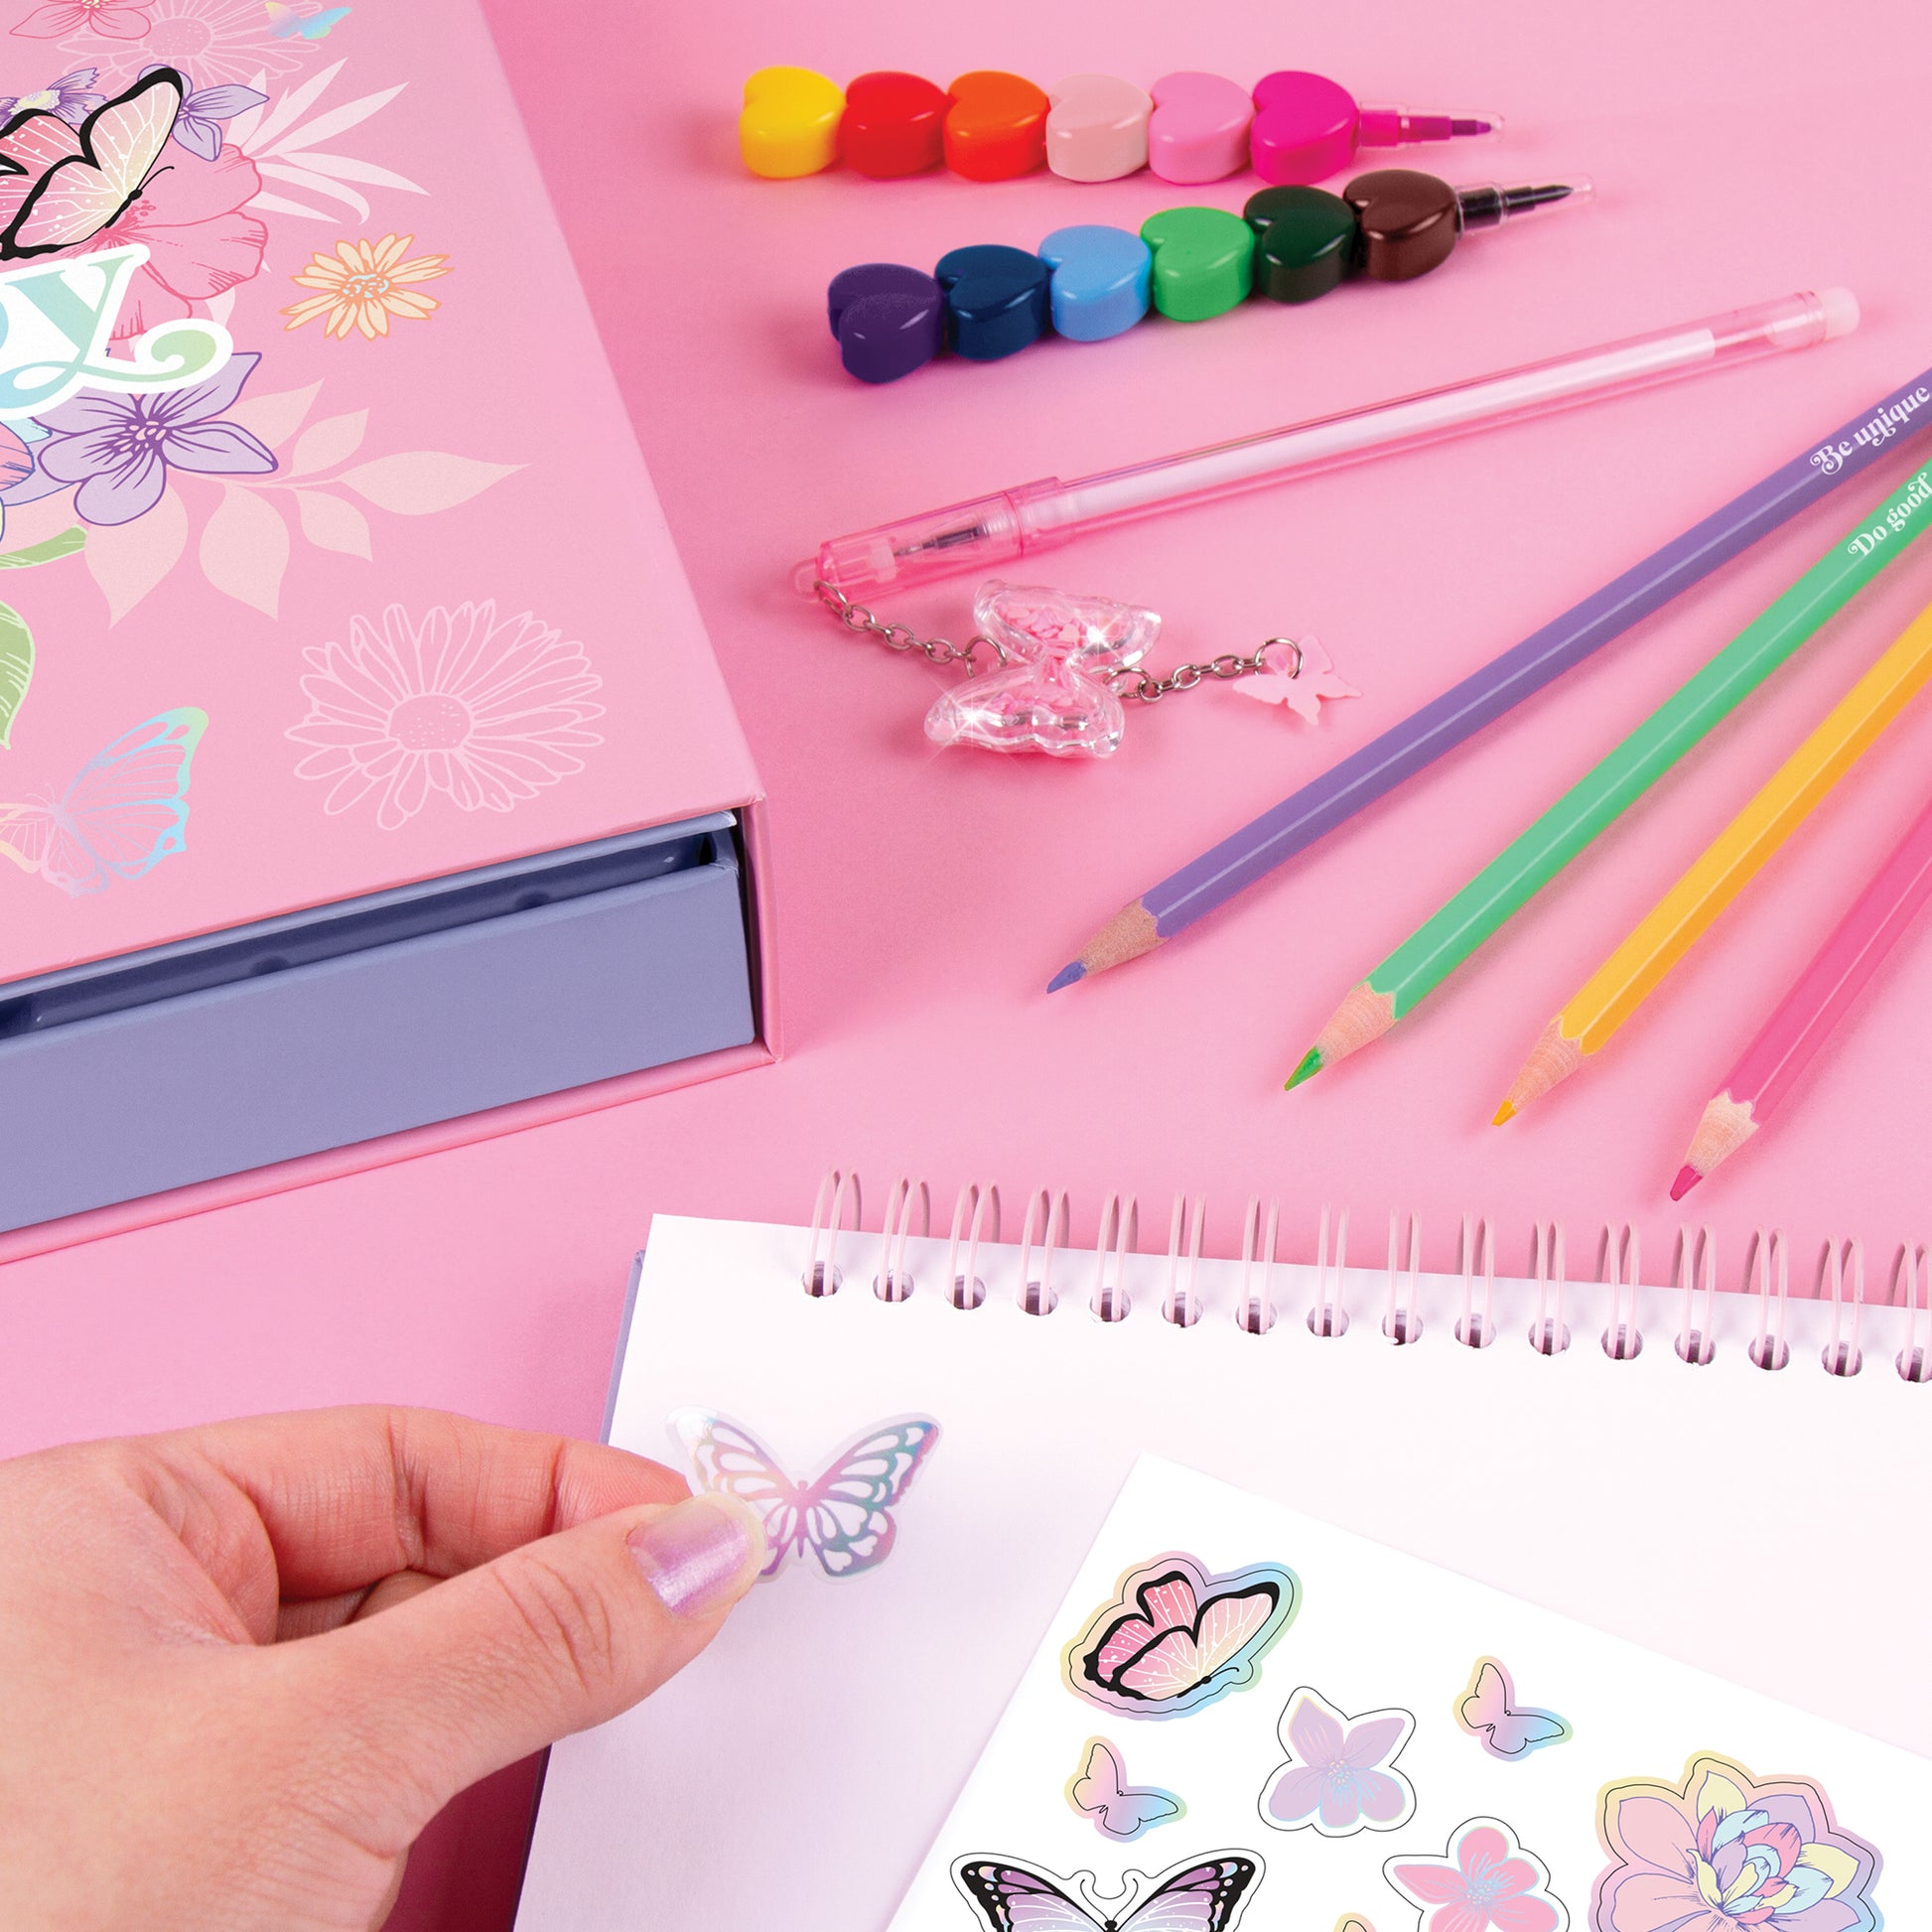 Butterfly All-In-1 Sketching Set – Make It Real